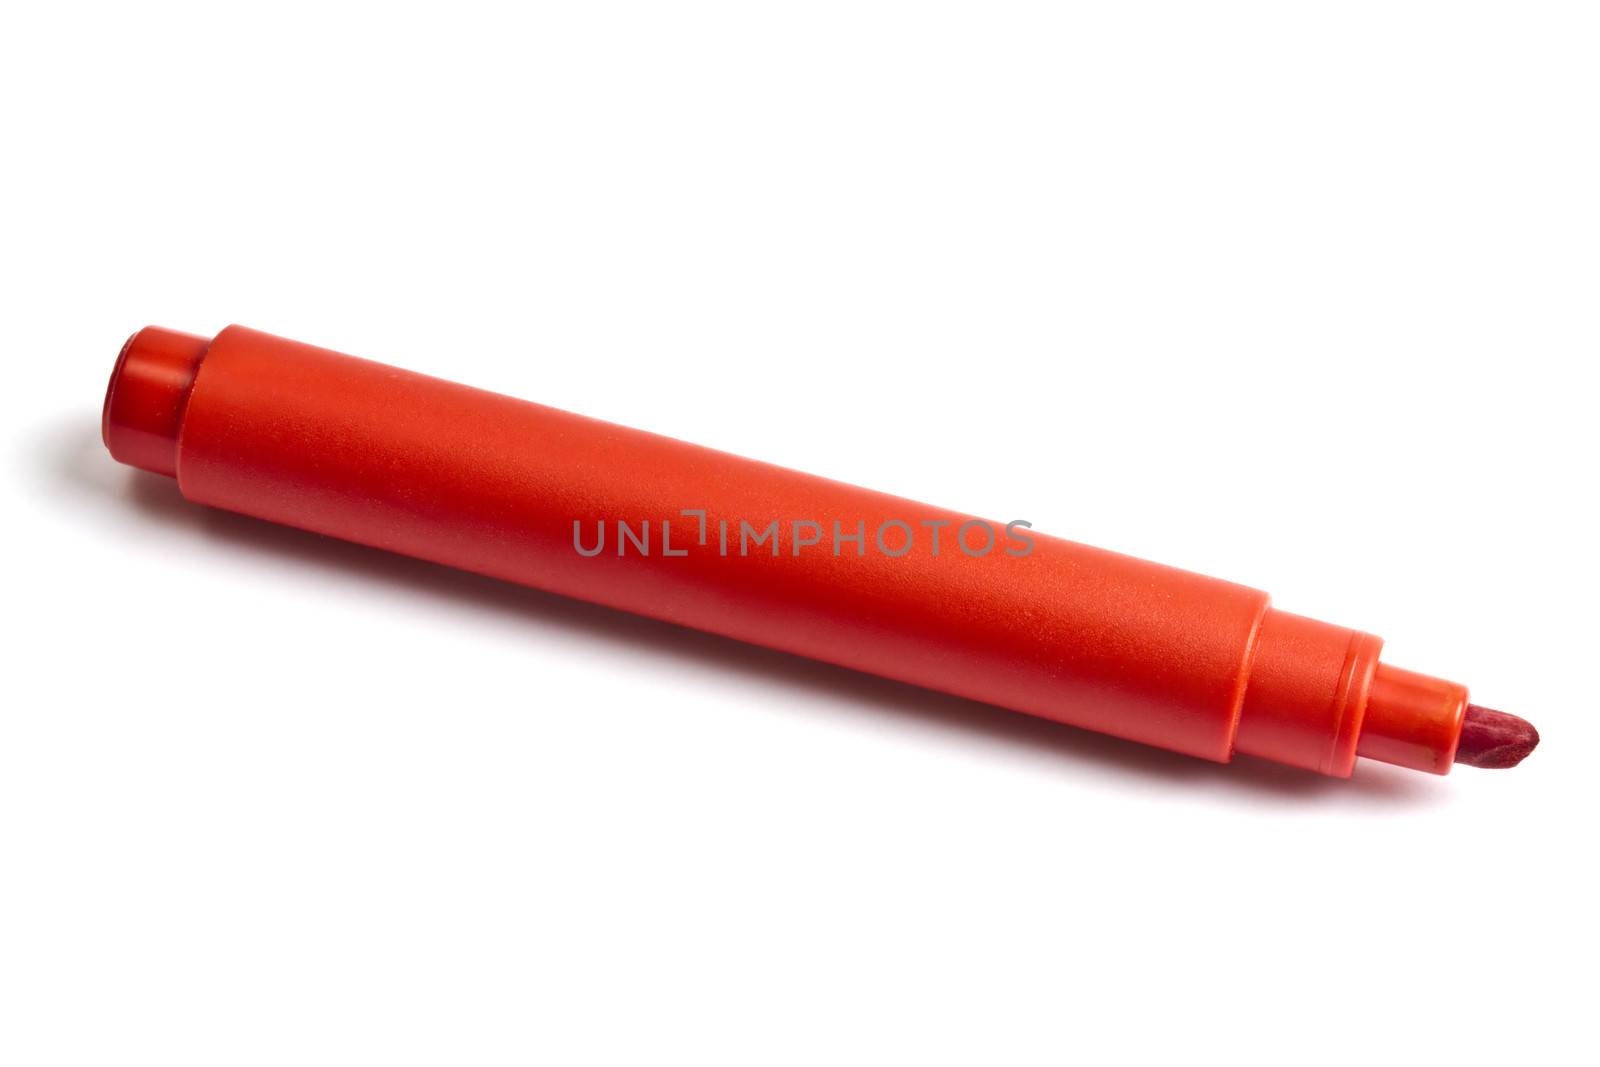 Red highlighter isolated on white background